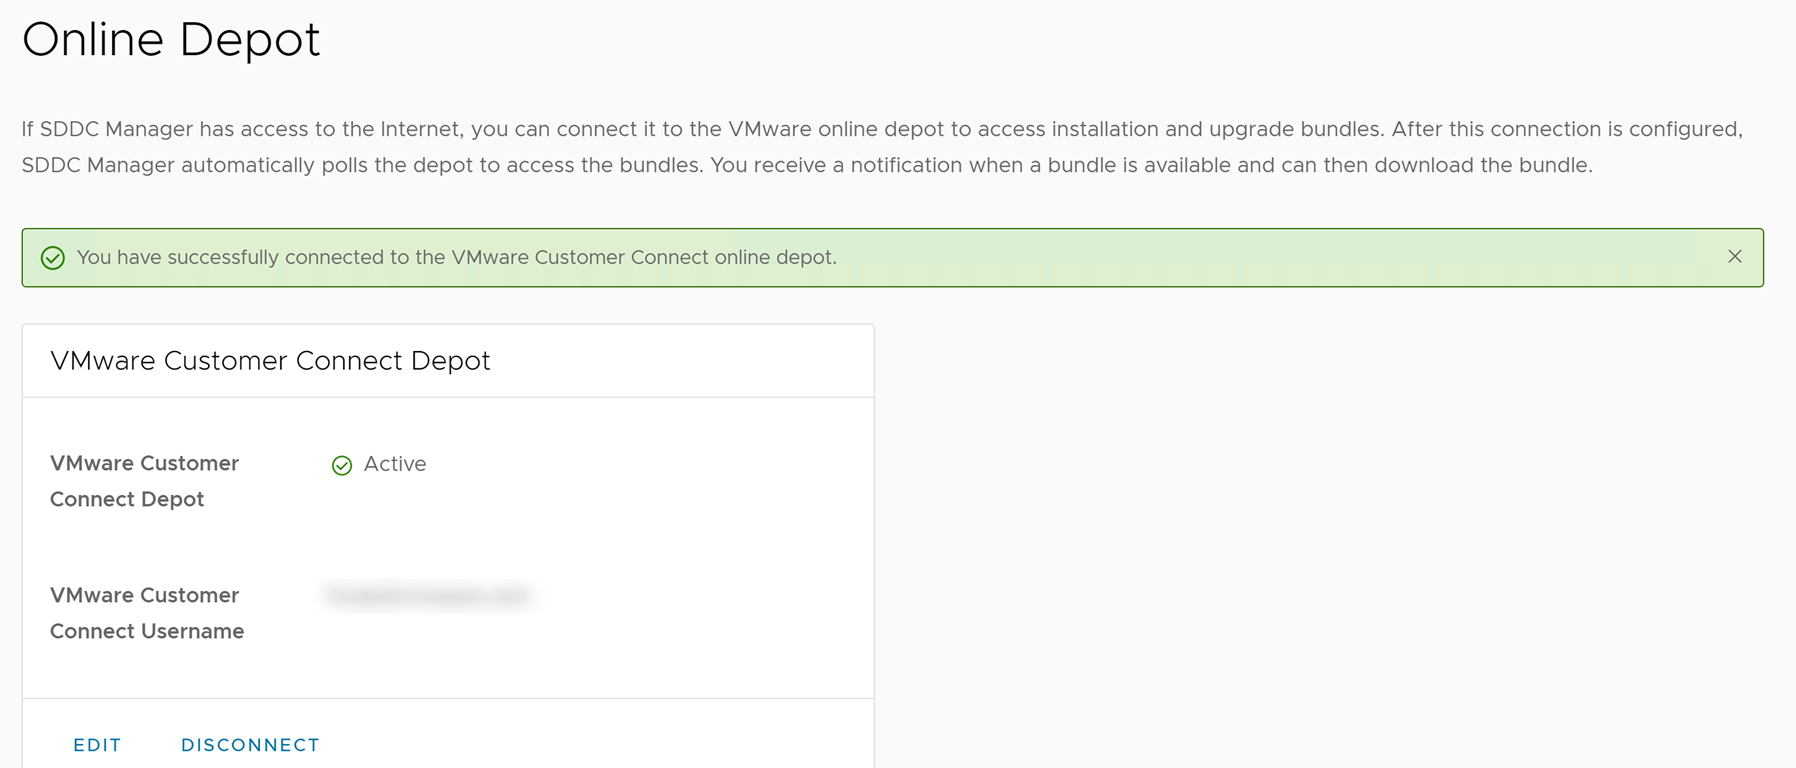 Successfully connected to the VMware Customer Connect online depot.